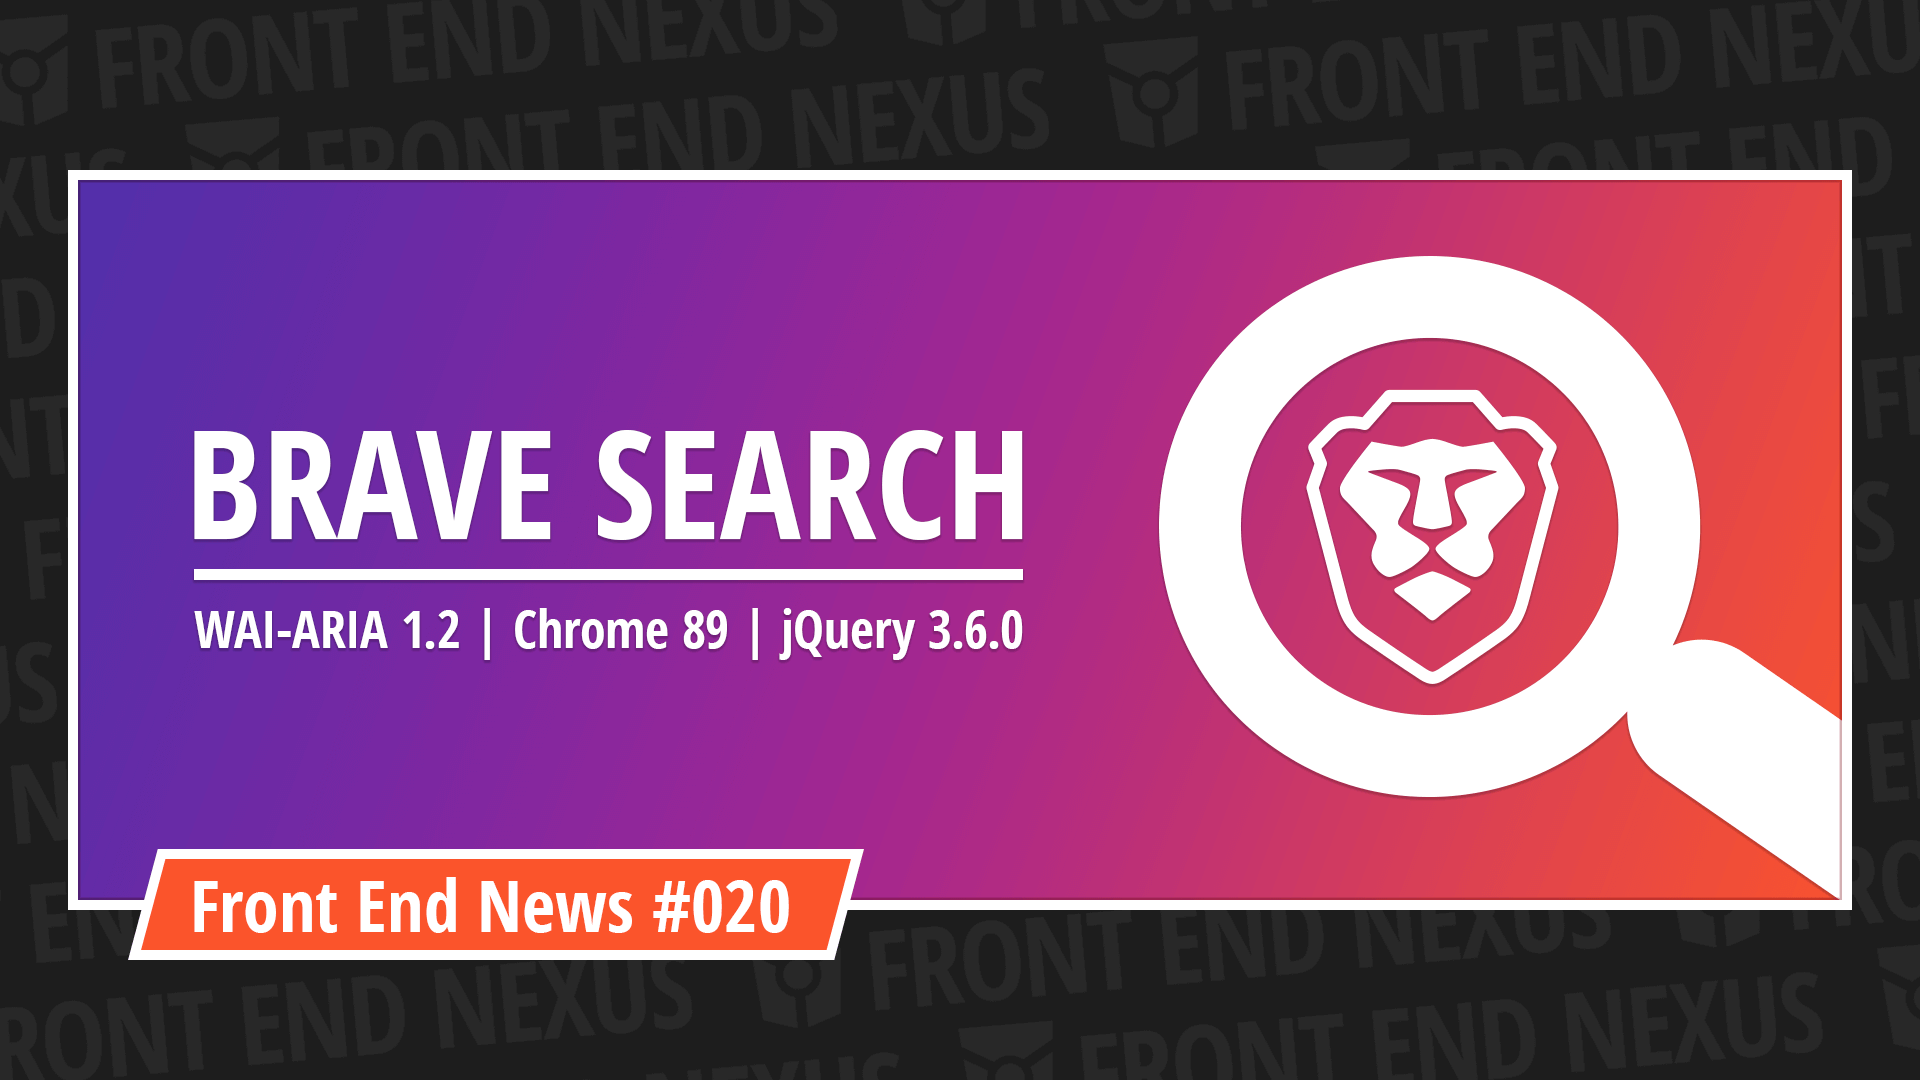 Brave enters the Search Market, Chrome 89 rolls out, and WAI-ARIA 1.2 is now a W3C Candidate Recommendation | Front End News #020